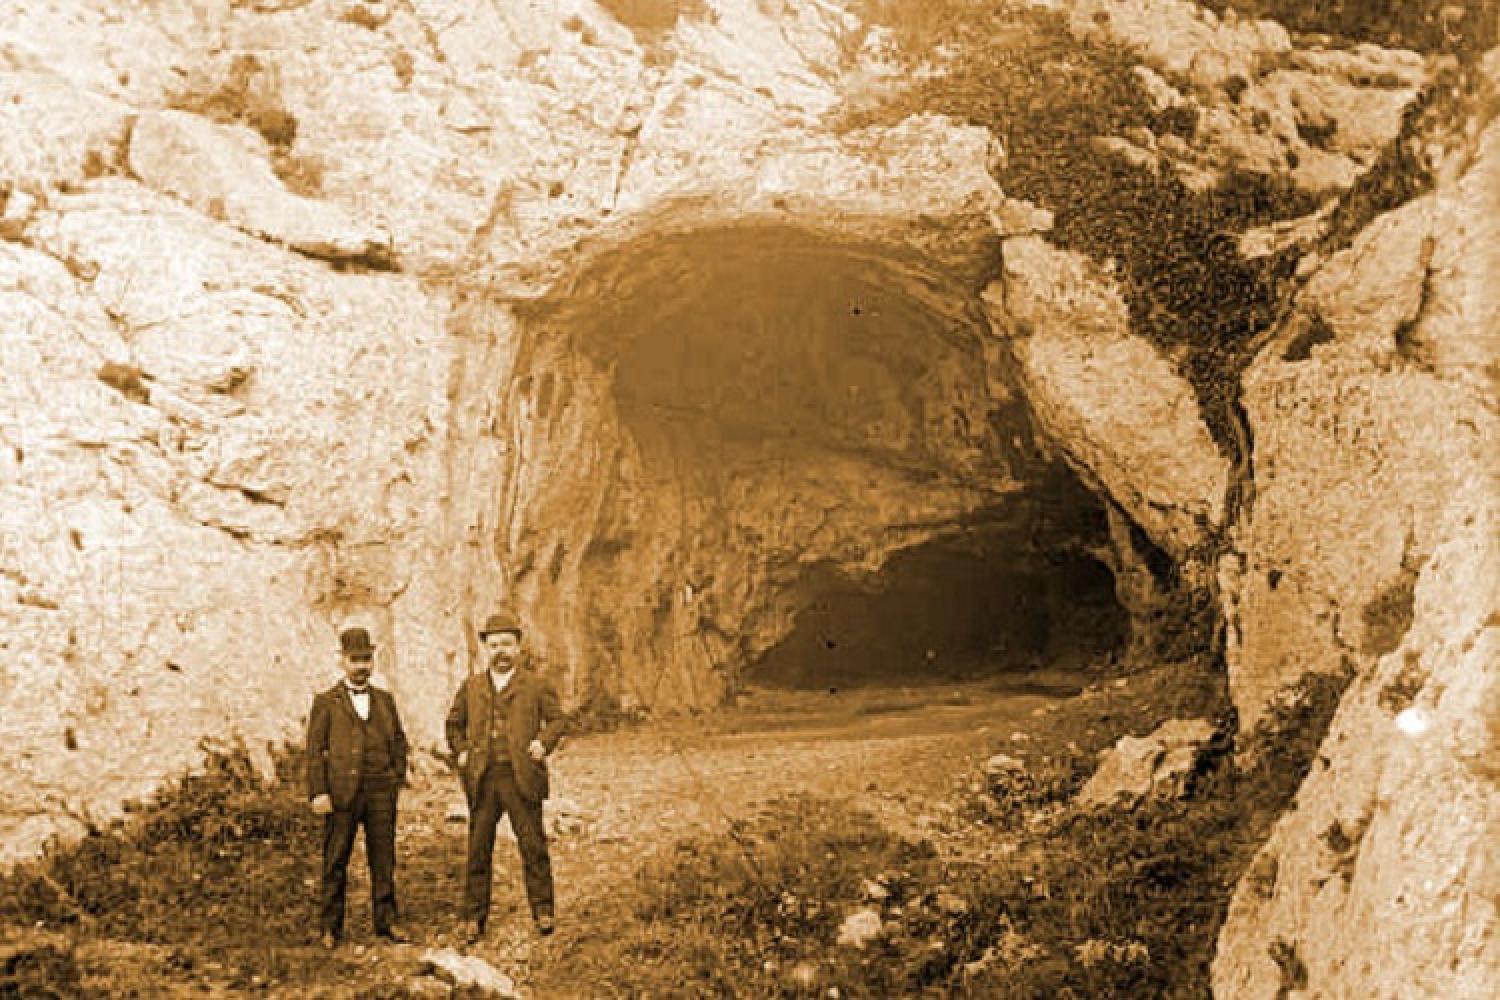 3_grotte_rolland_excursionnistes_33_fi_1414-1478_archives_marseille_sepia.jpg